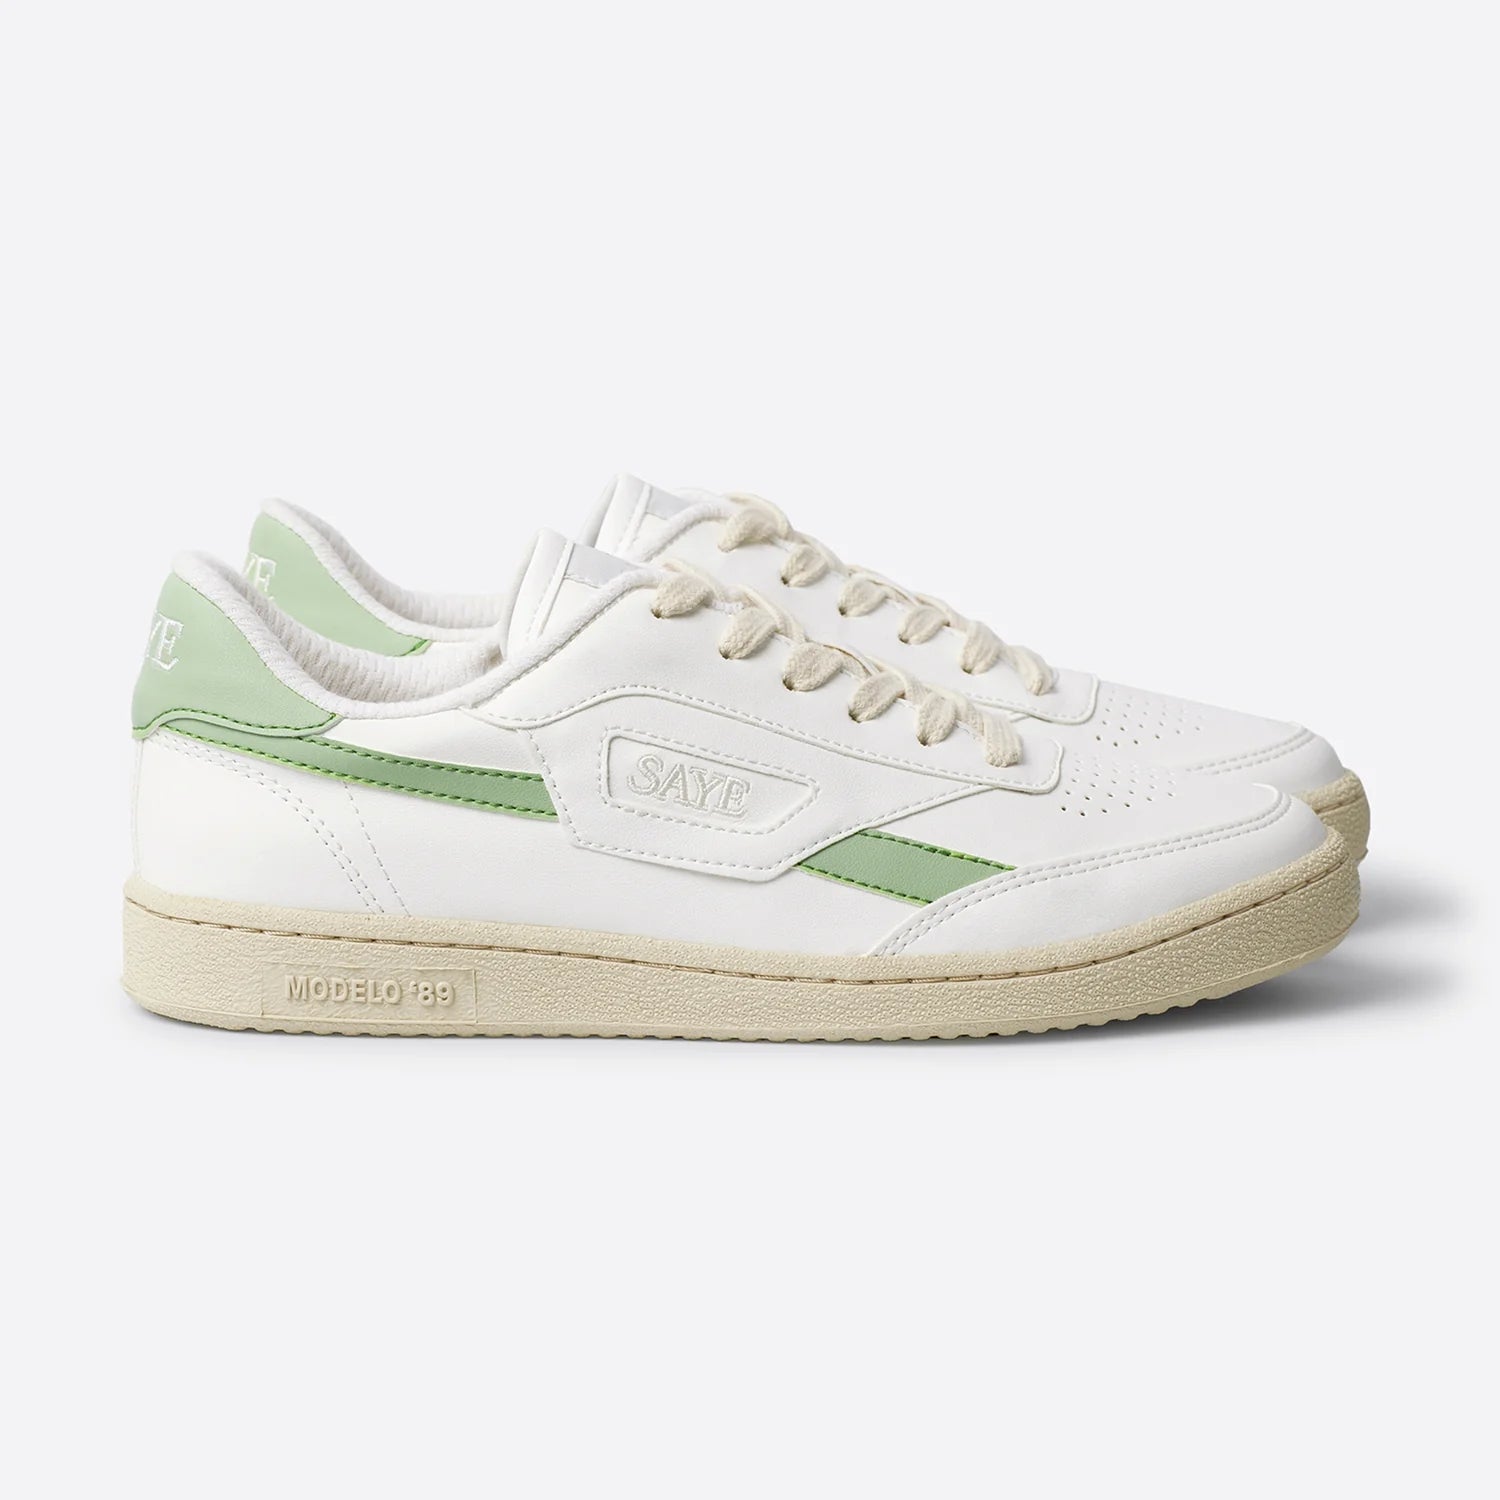 Off white trainers with lime green side detail